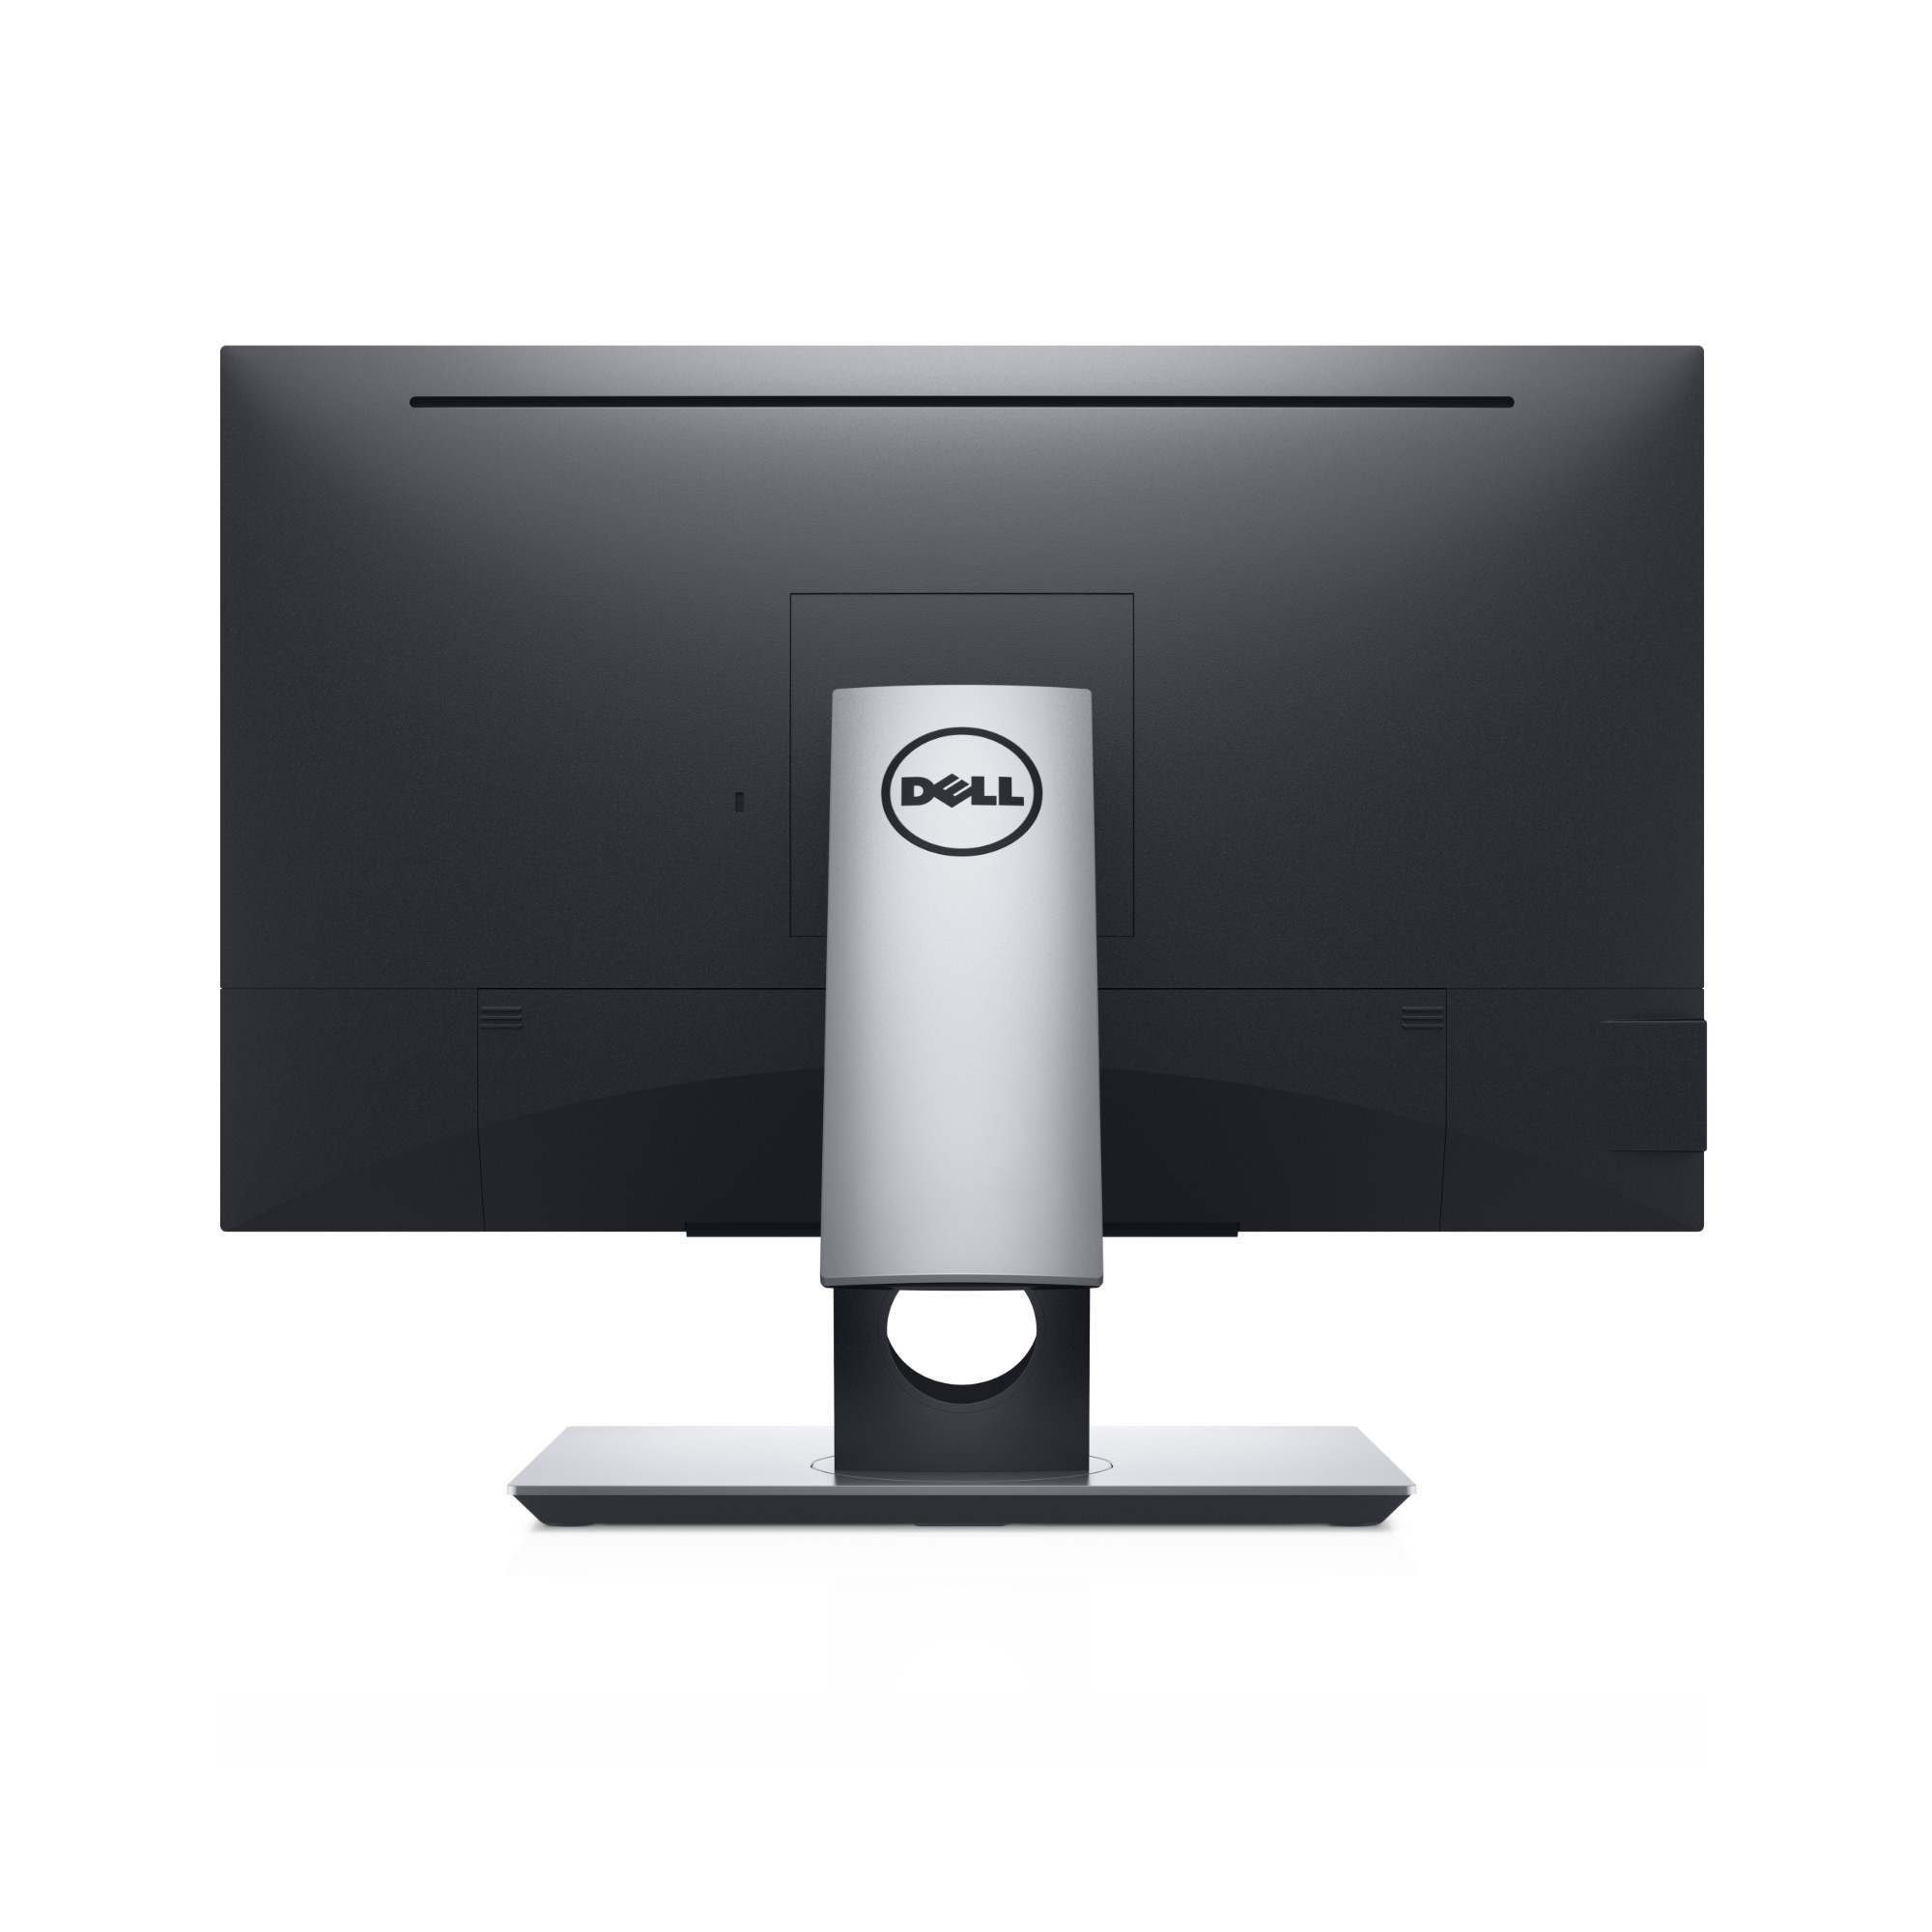 dell multitouch monitor